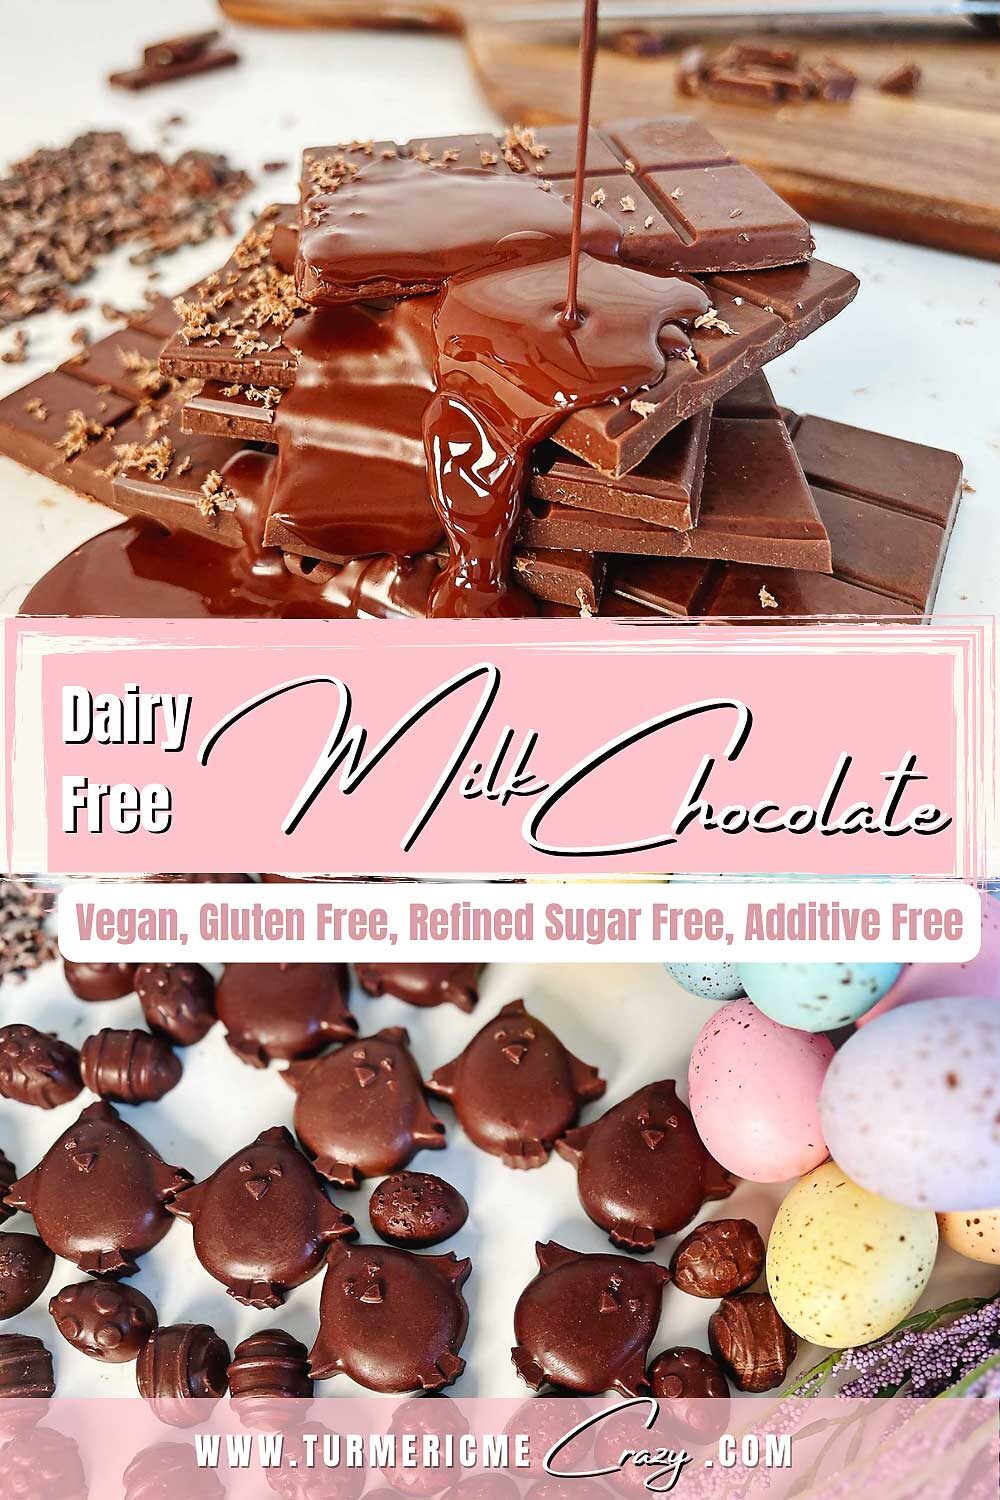 Make 100% natural, delicious dairy free milk chocolate just in time for the Easter Bunny! This homemade chocolate is vegan & free from processed sugars & additives. Made with just 4 natural ingredients they are quick & easy to make! Add in your favourite natural flavourings and make the perfect vegan milk chocolate treat! #plant based chocolate, #dairy free chocolate, #vegan chocolate, #milk chocolate